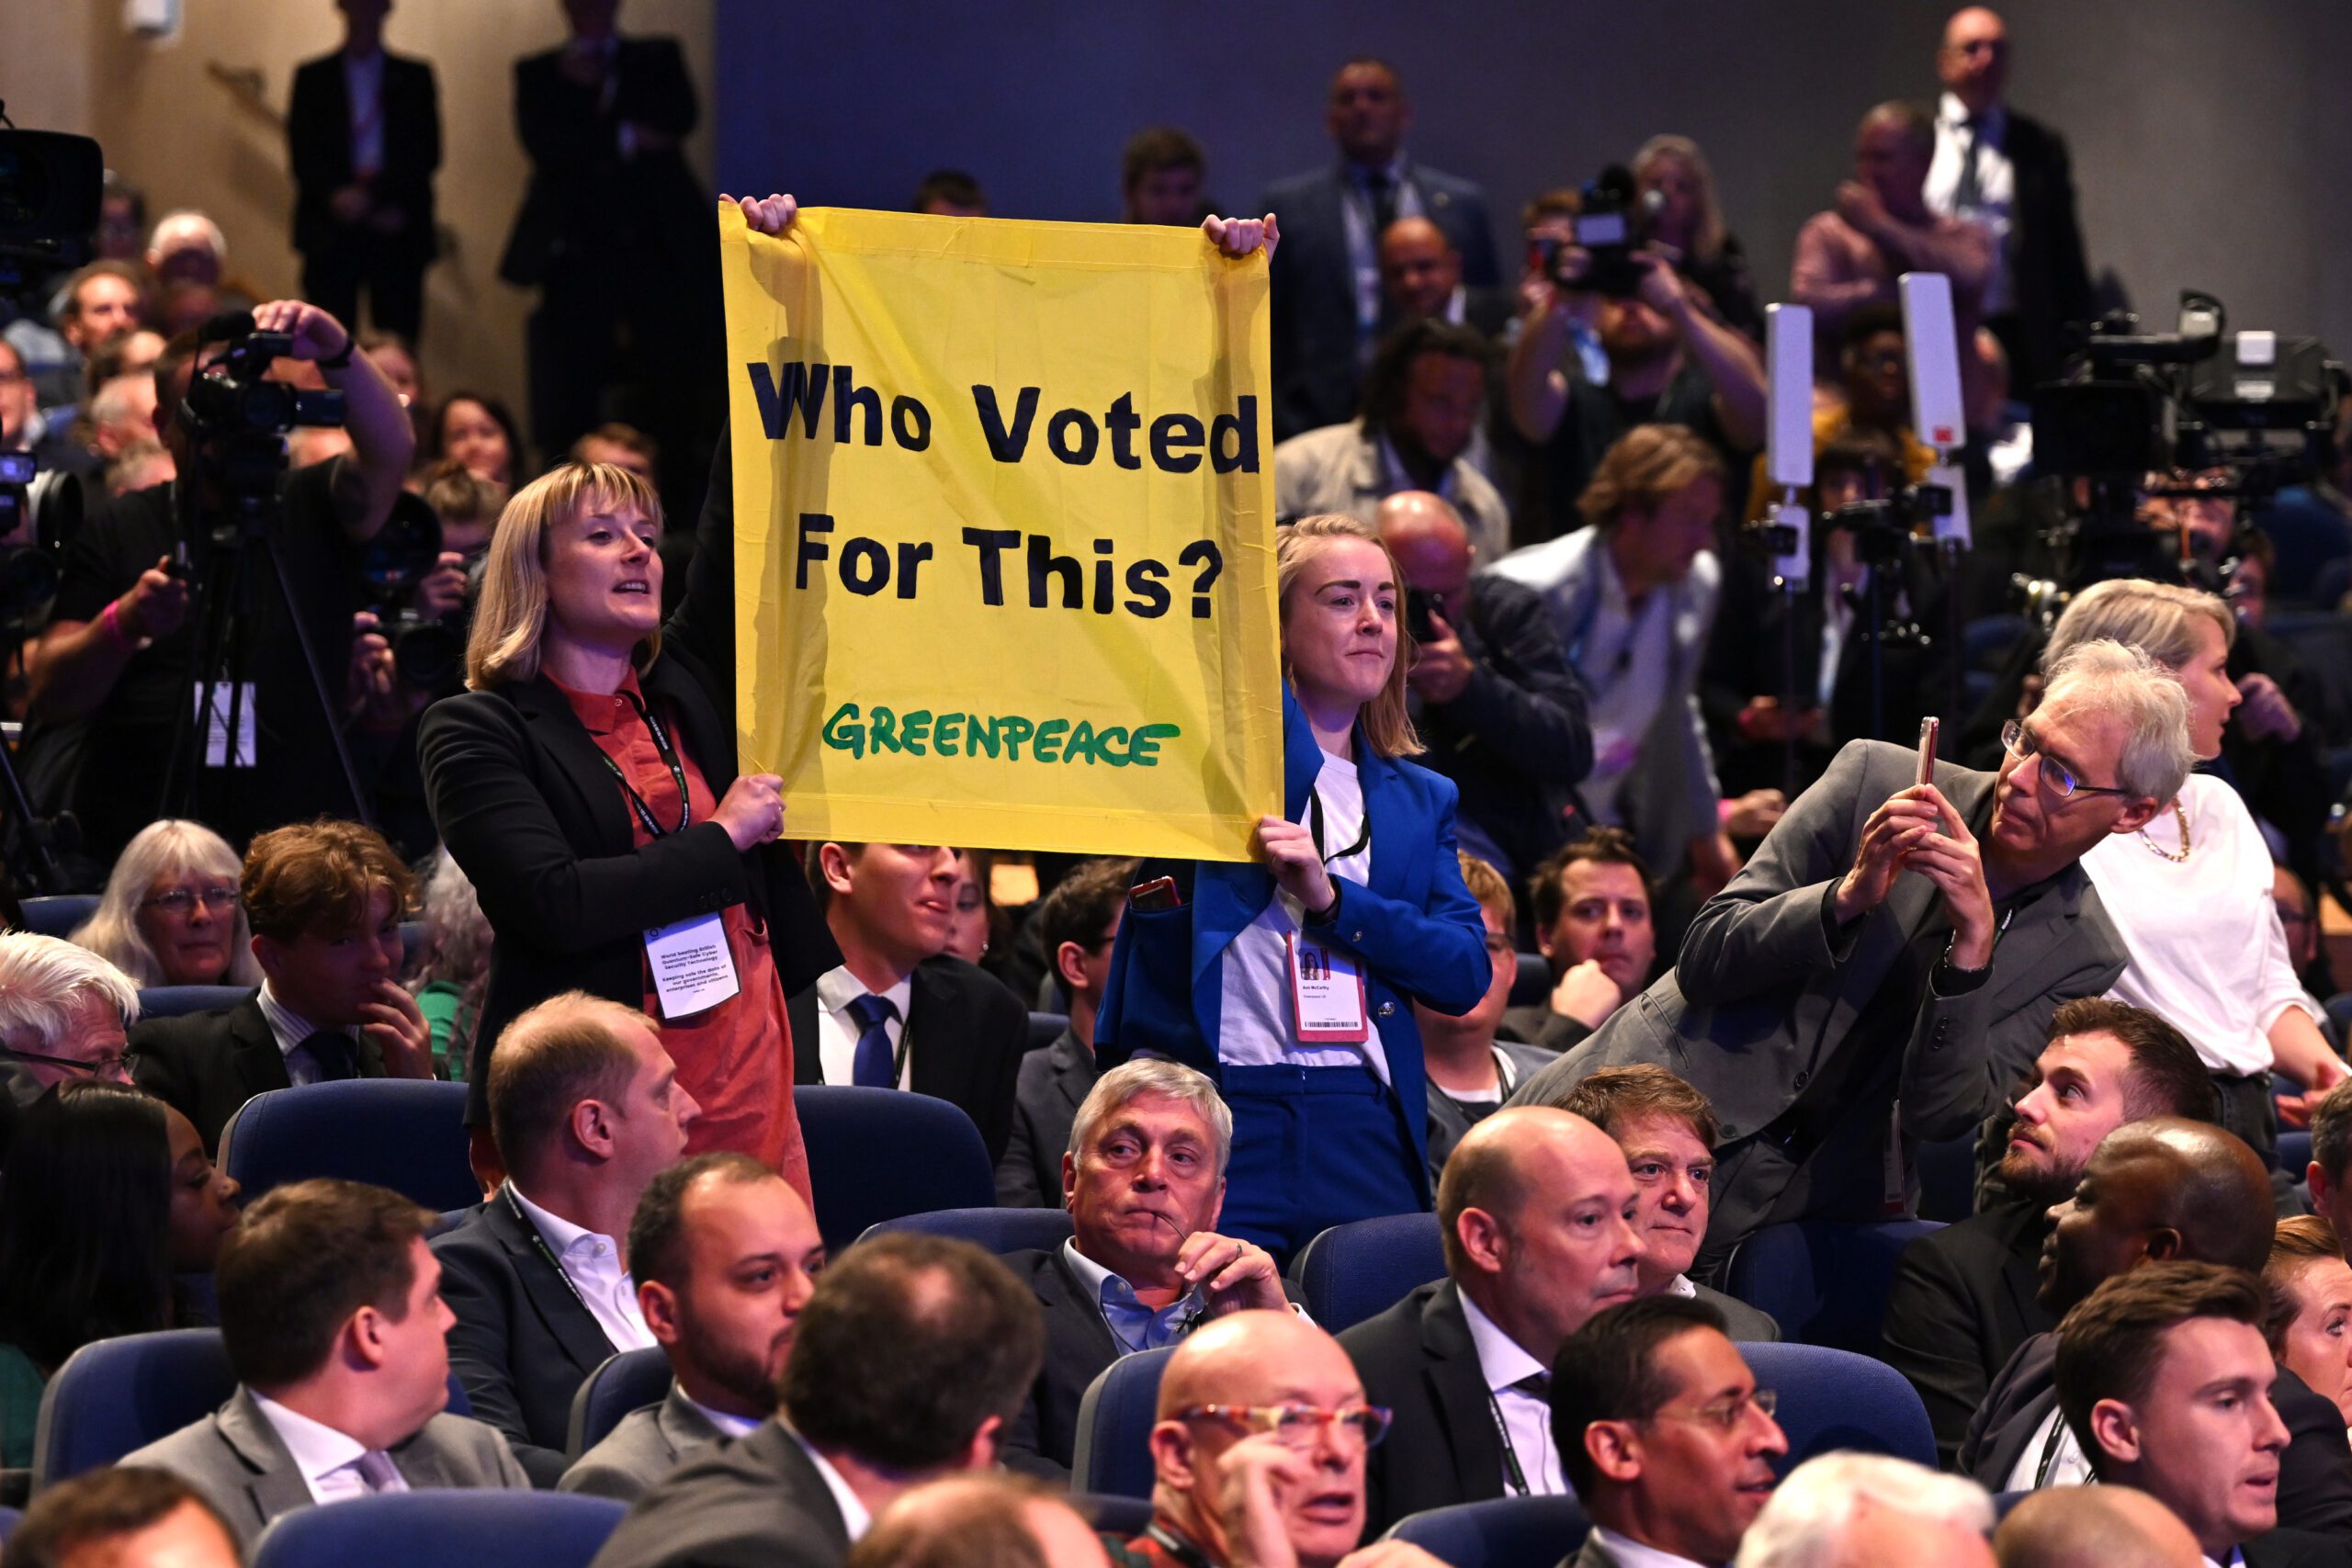 Two campaigners standing up in an audience with a banner that reads “Who Voted For This?”